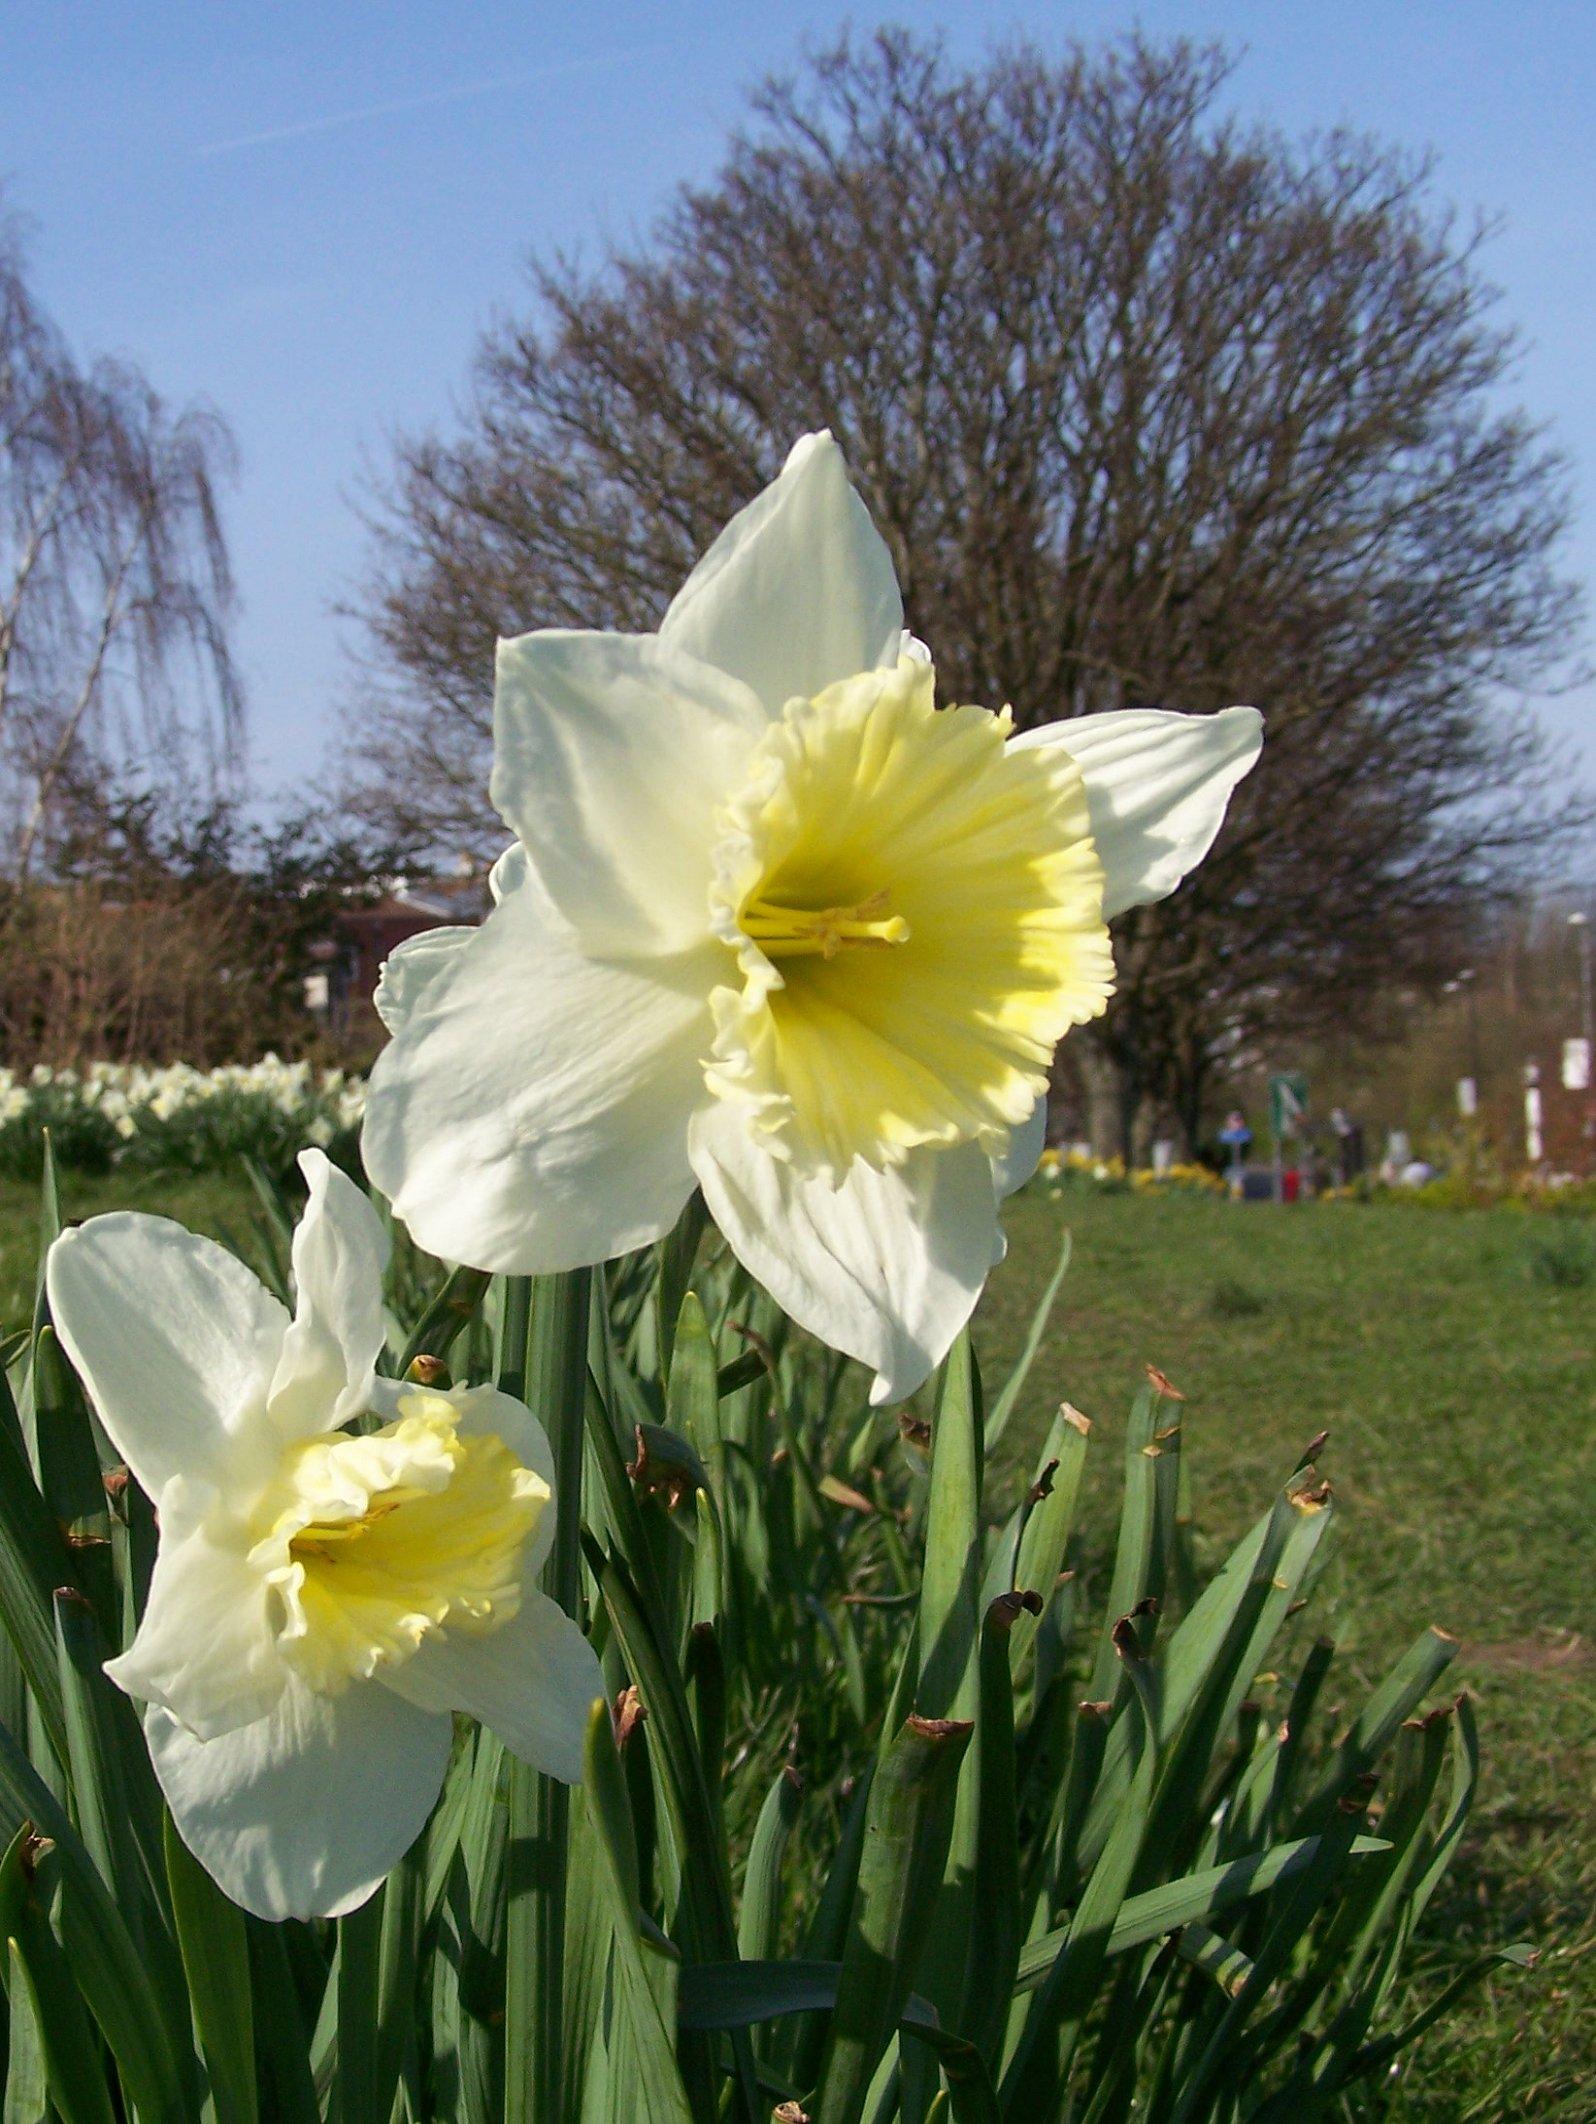 Precooled Daffodil Large Cupped 'Ice Follies' - from Leo Berbee Bulb Company